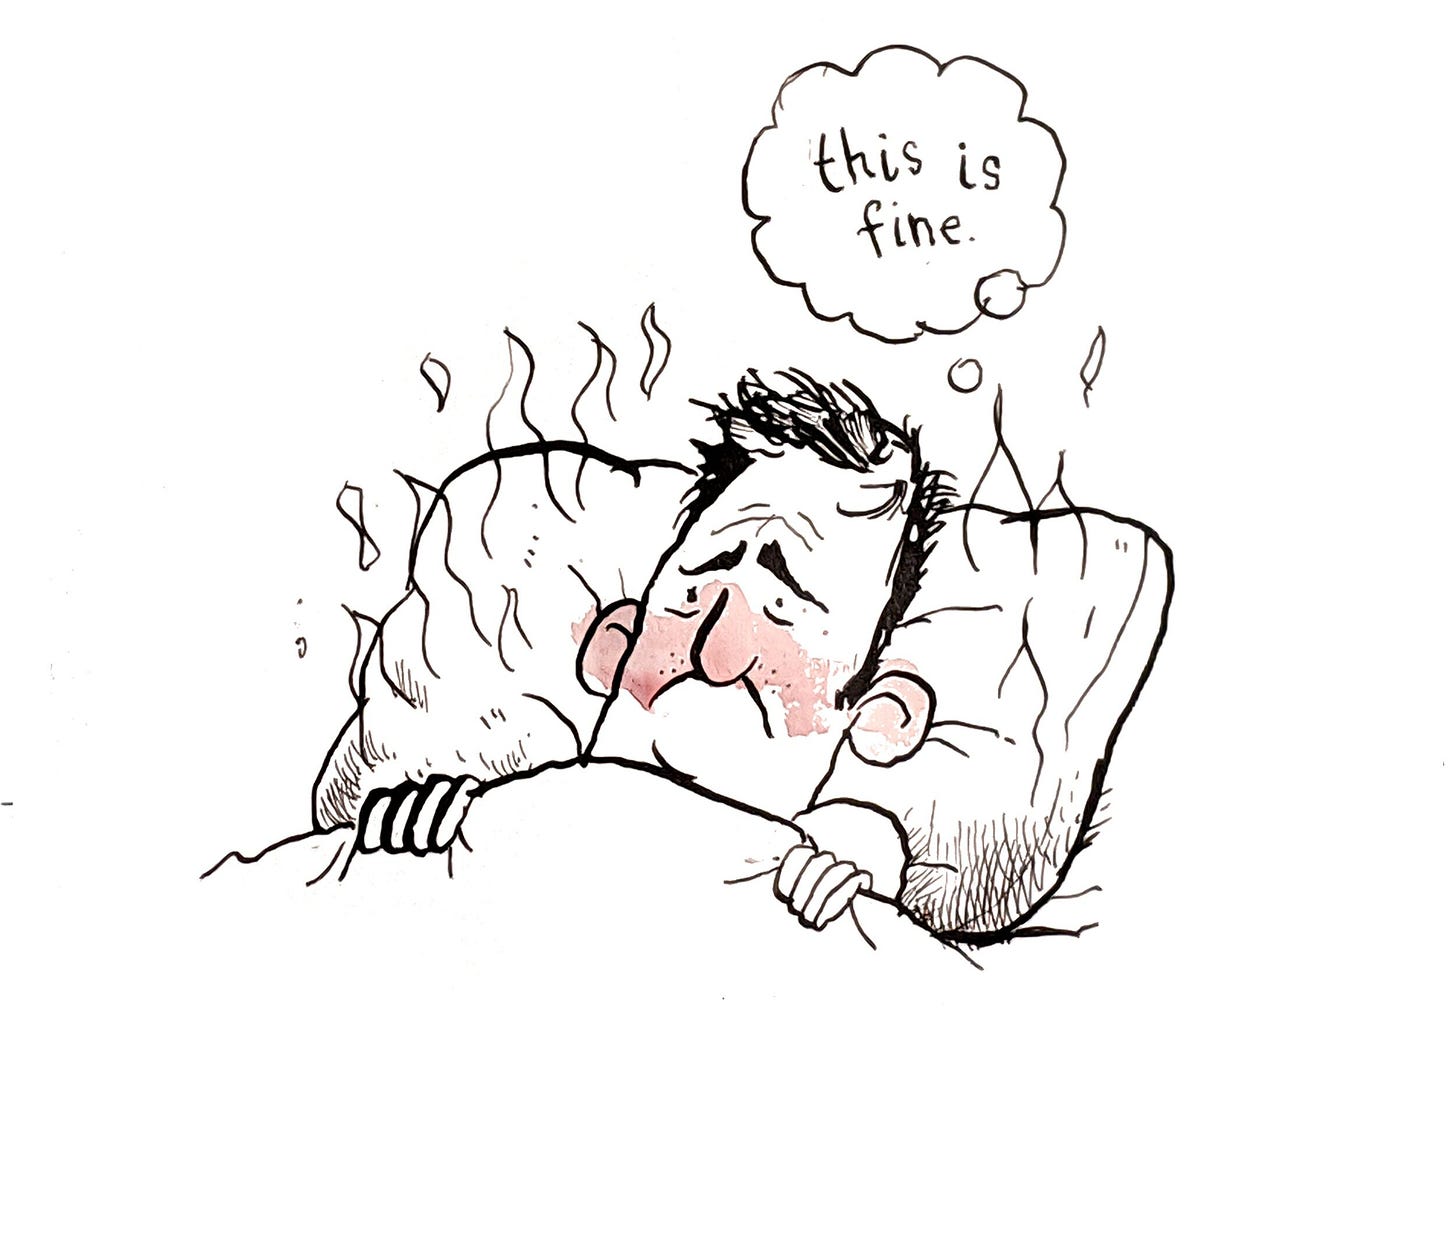 Guy lying in bed with pillow on fire "This is fine"